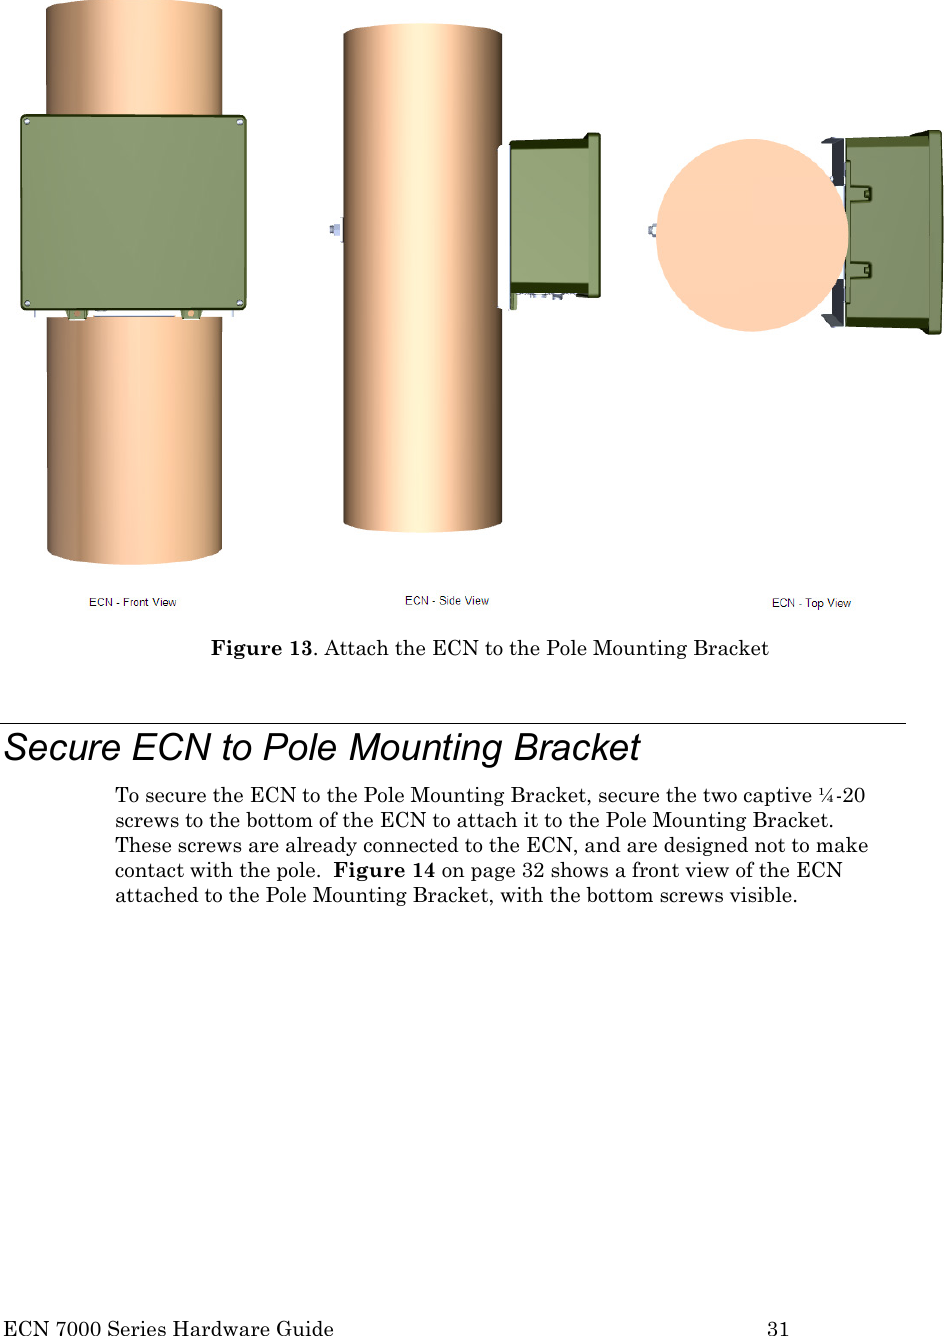  ECN 7000 Series Hardware Guide        31    Figure 13. Attach the ECN to the Pole Mounting Bracket  Secure ECN to Pole Mounting Bracket To secure the ECN to the Pole Mounting Bracket, secure the two captive ¼-20 screws to the bottom of the ECN to attach it to the Pole Mounting Bracket.  These screws are already connected to the ECN, and are designed not to make contact with the pole.  Figure 14 on page 32 shows a front view of the ECN attached to the Pole Mounting Bracket, with the bottom screws visible. 